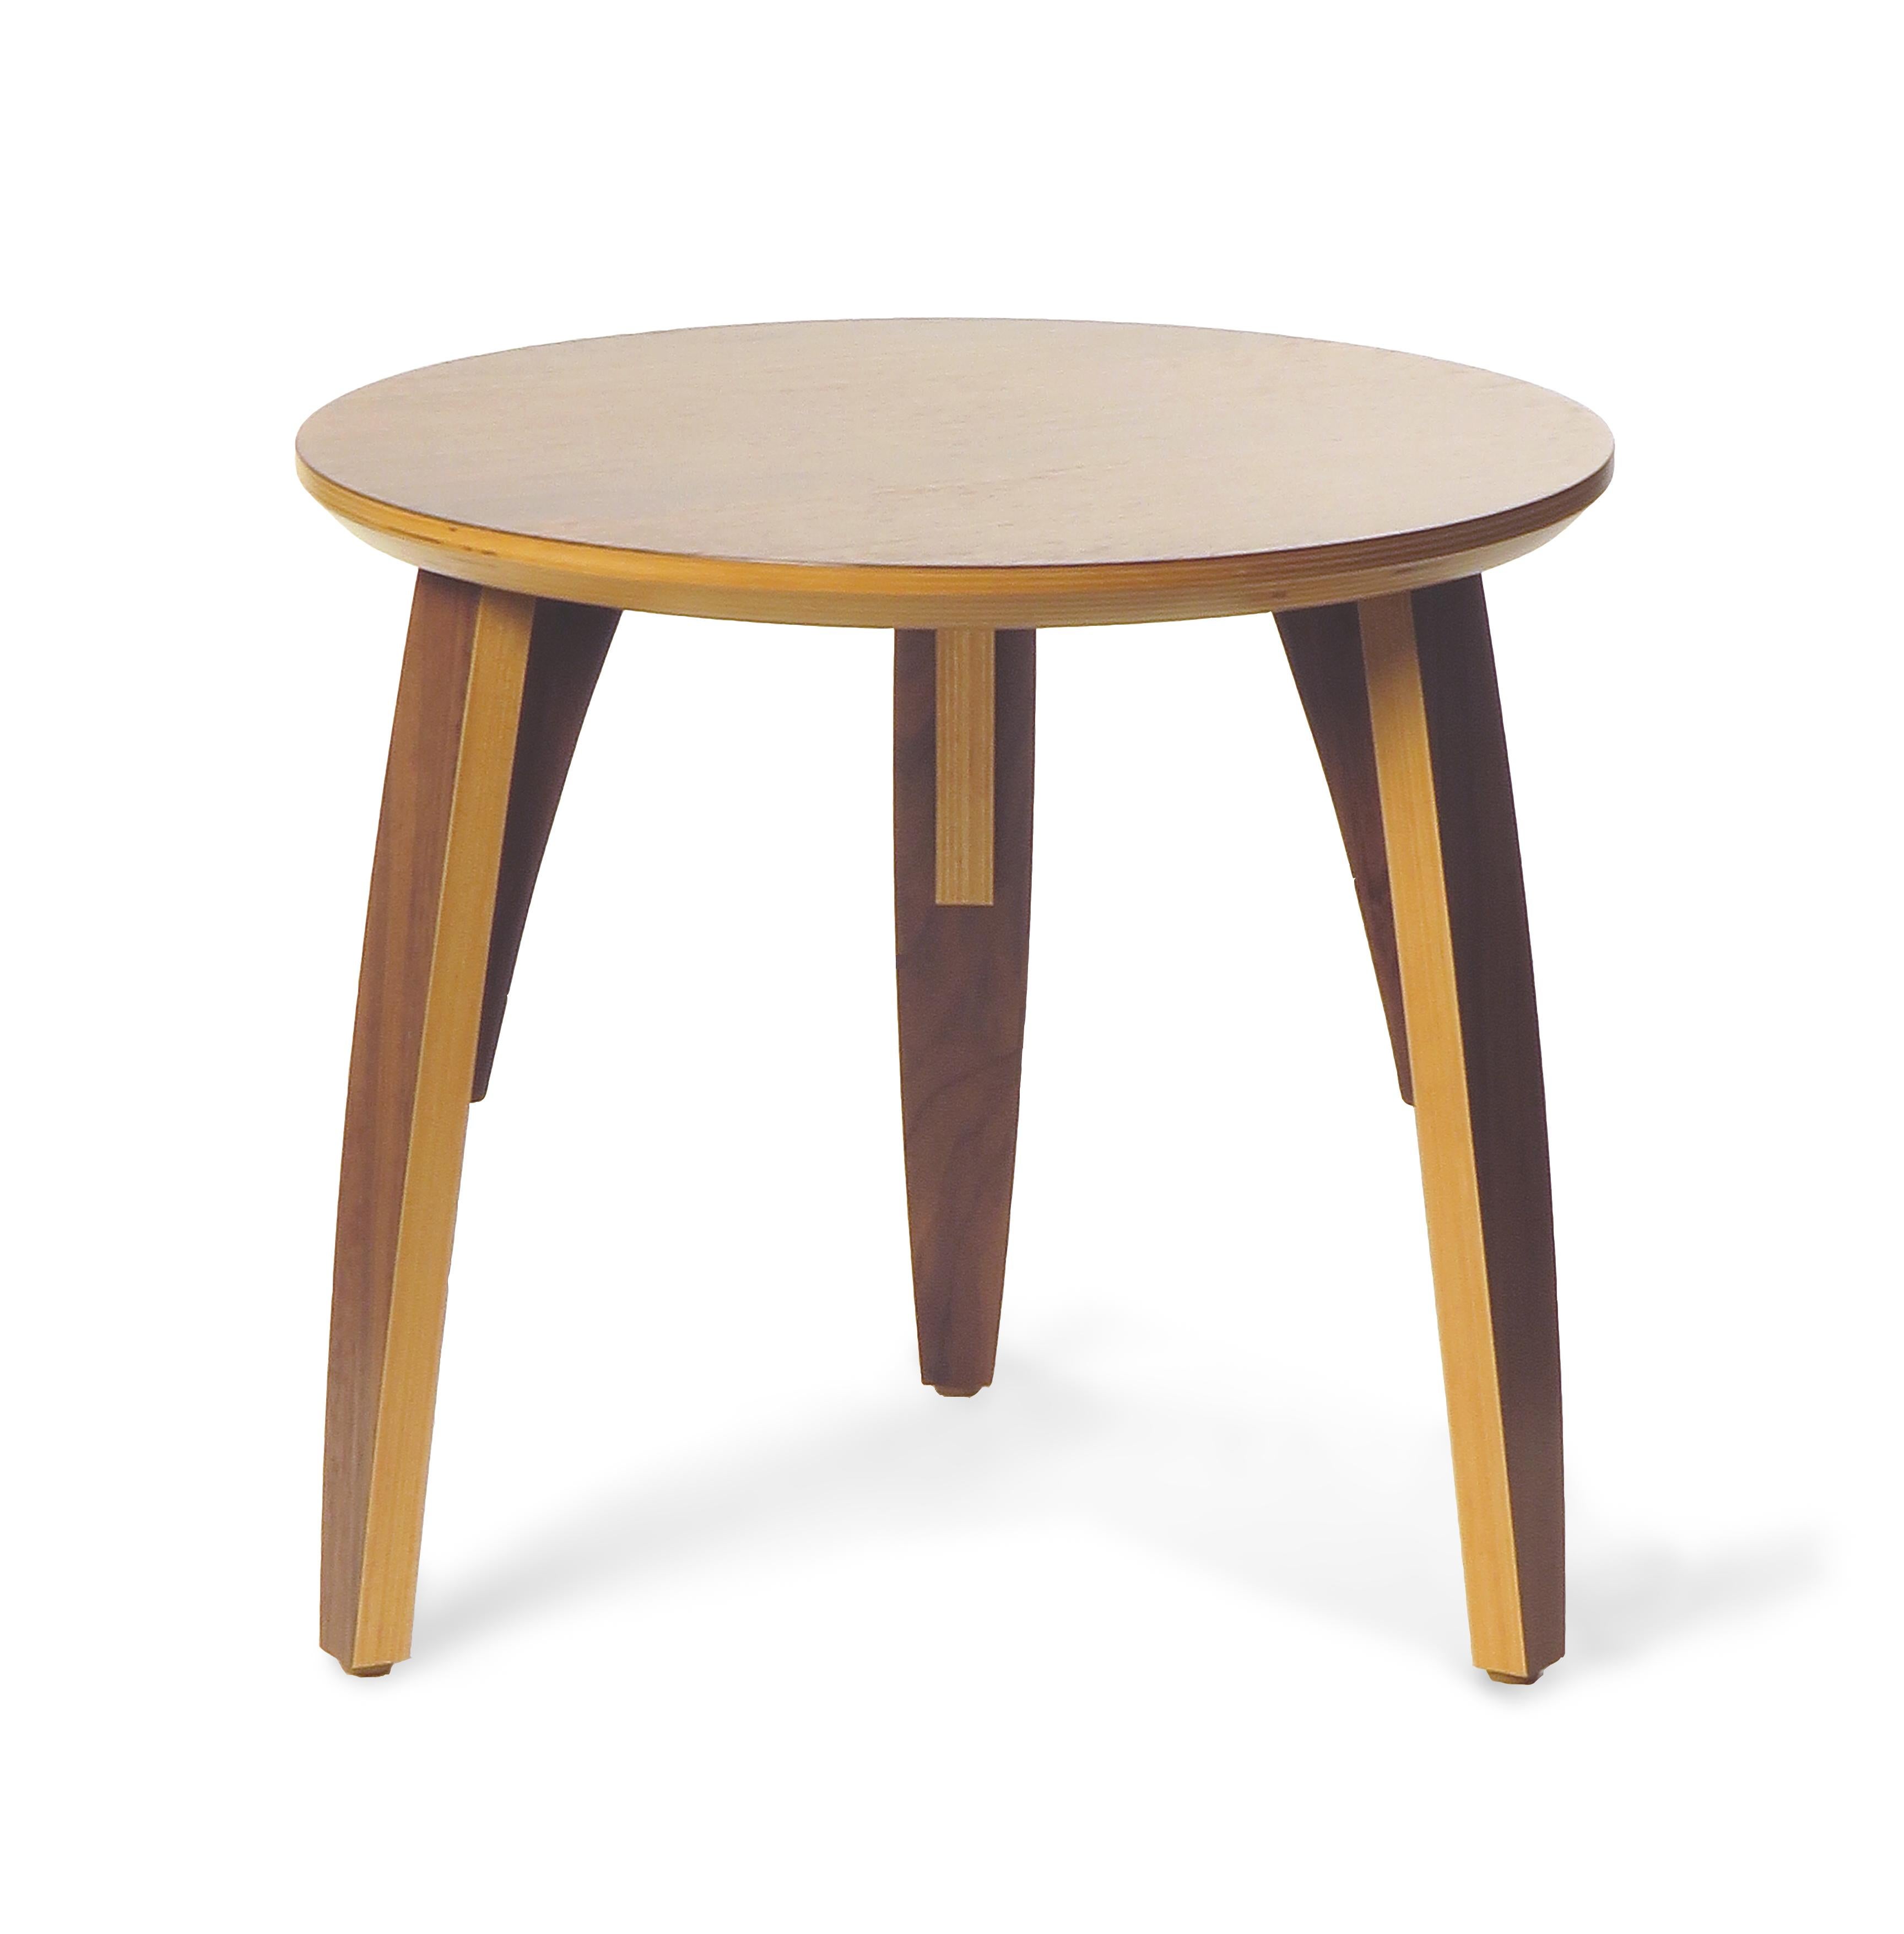 Birch Natural Finish Maple Modern Side Table. Made in USA by Peter Danko For Sale